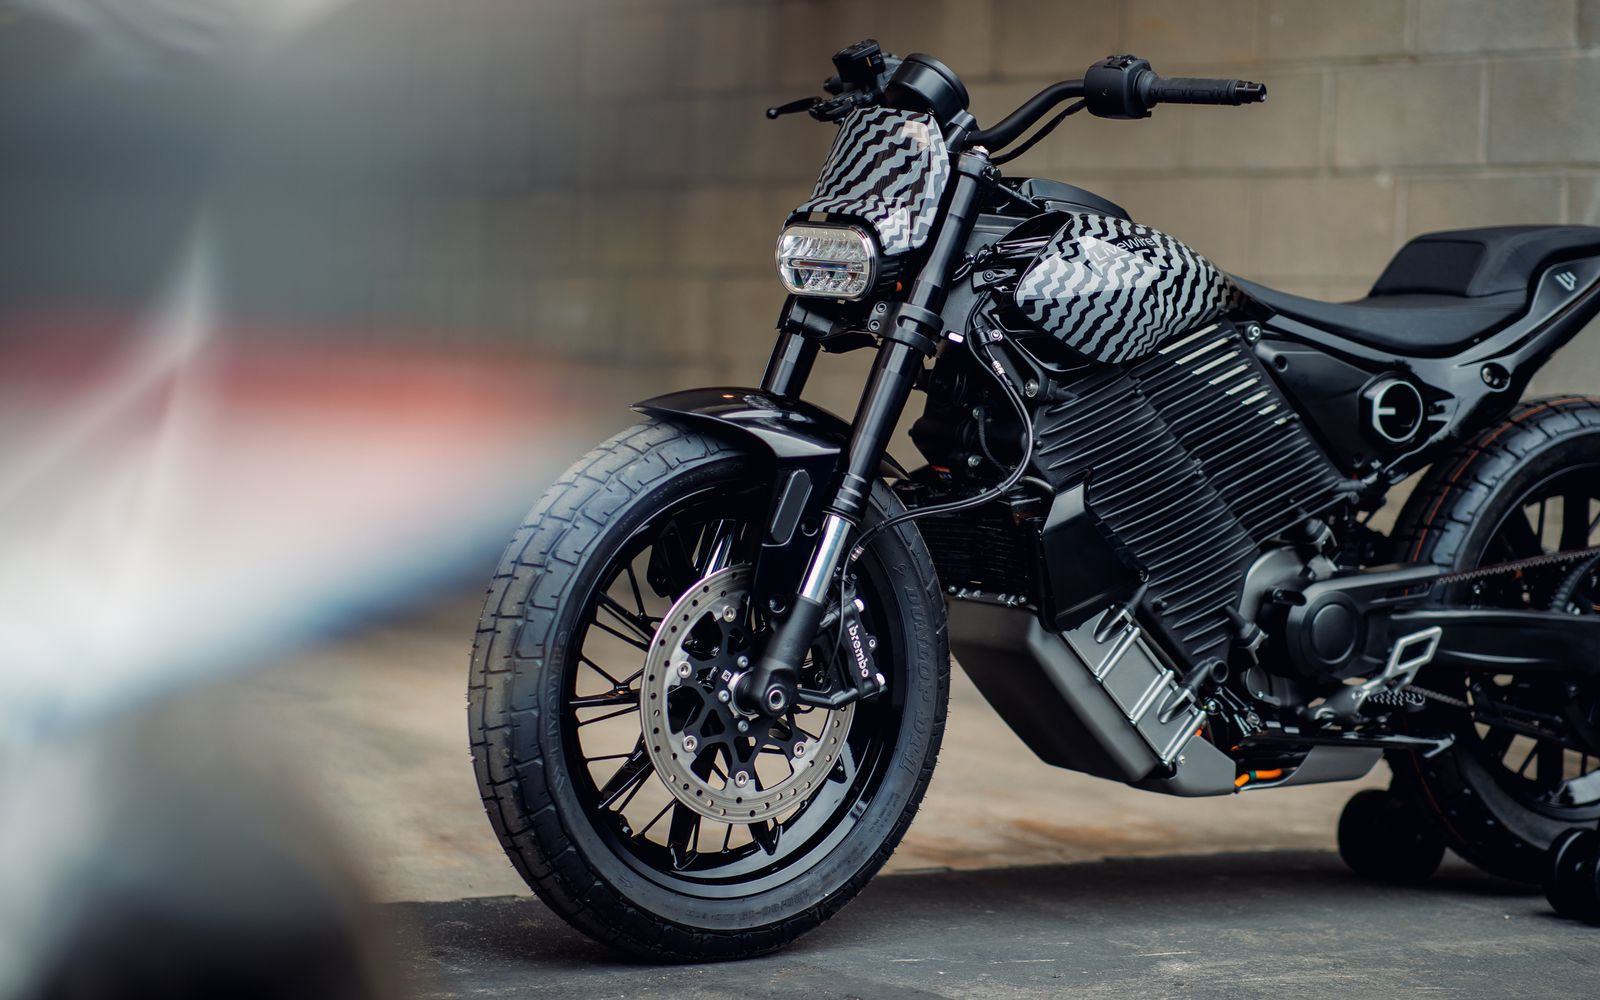 The Harley-Davidson LiveWire S2 Del Mar is the company's most economical electric motorcycle to date